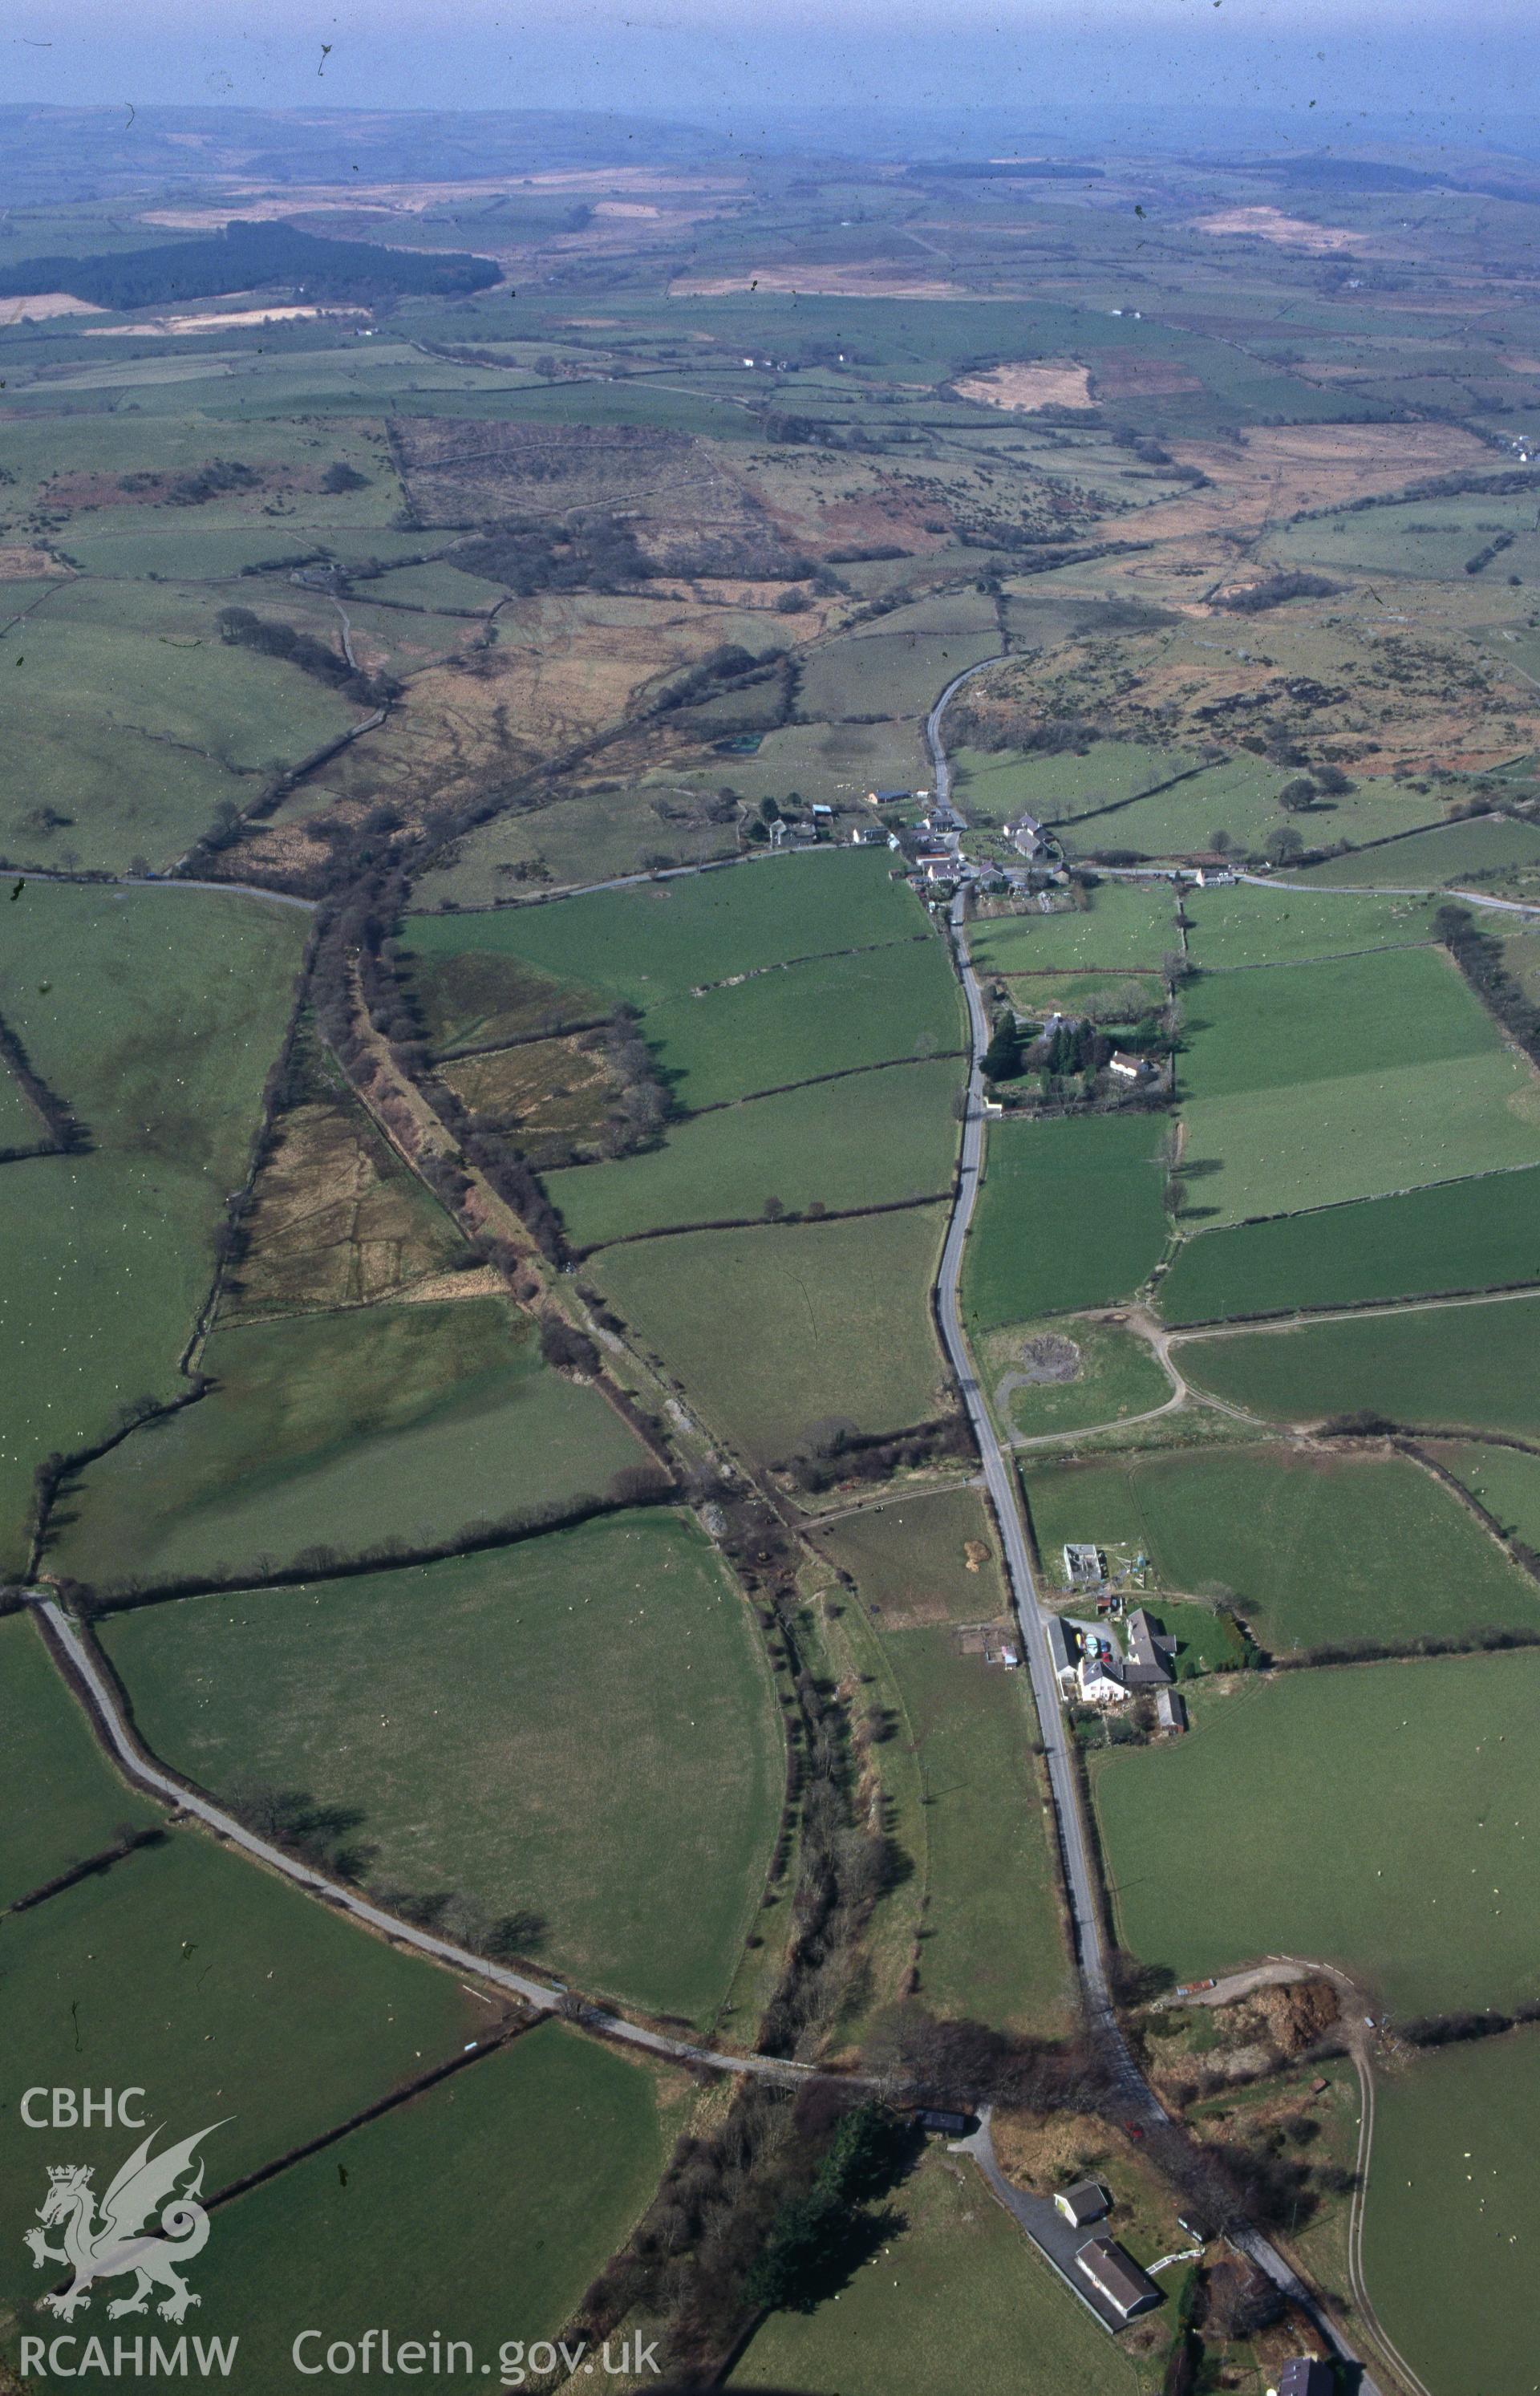 Slide of RCAHMW colour oblique aerial photograph of Ystradmeurig, taken by C.R. Musson, 23/3/1995.